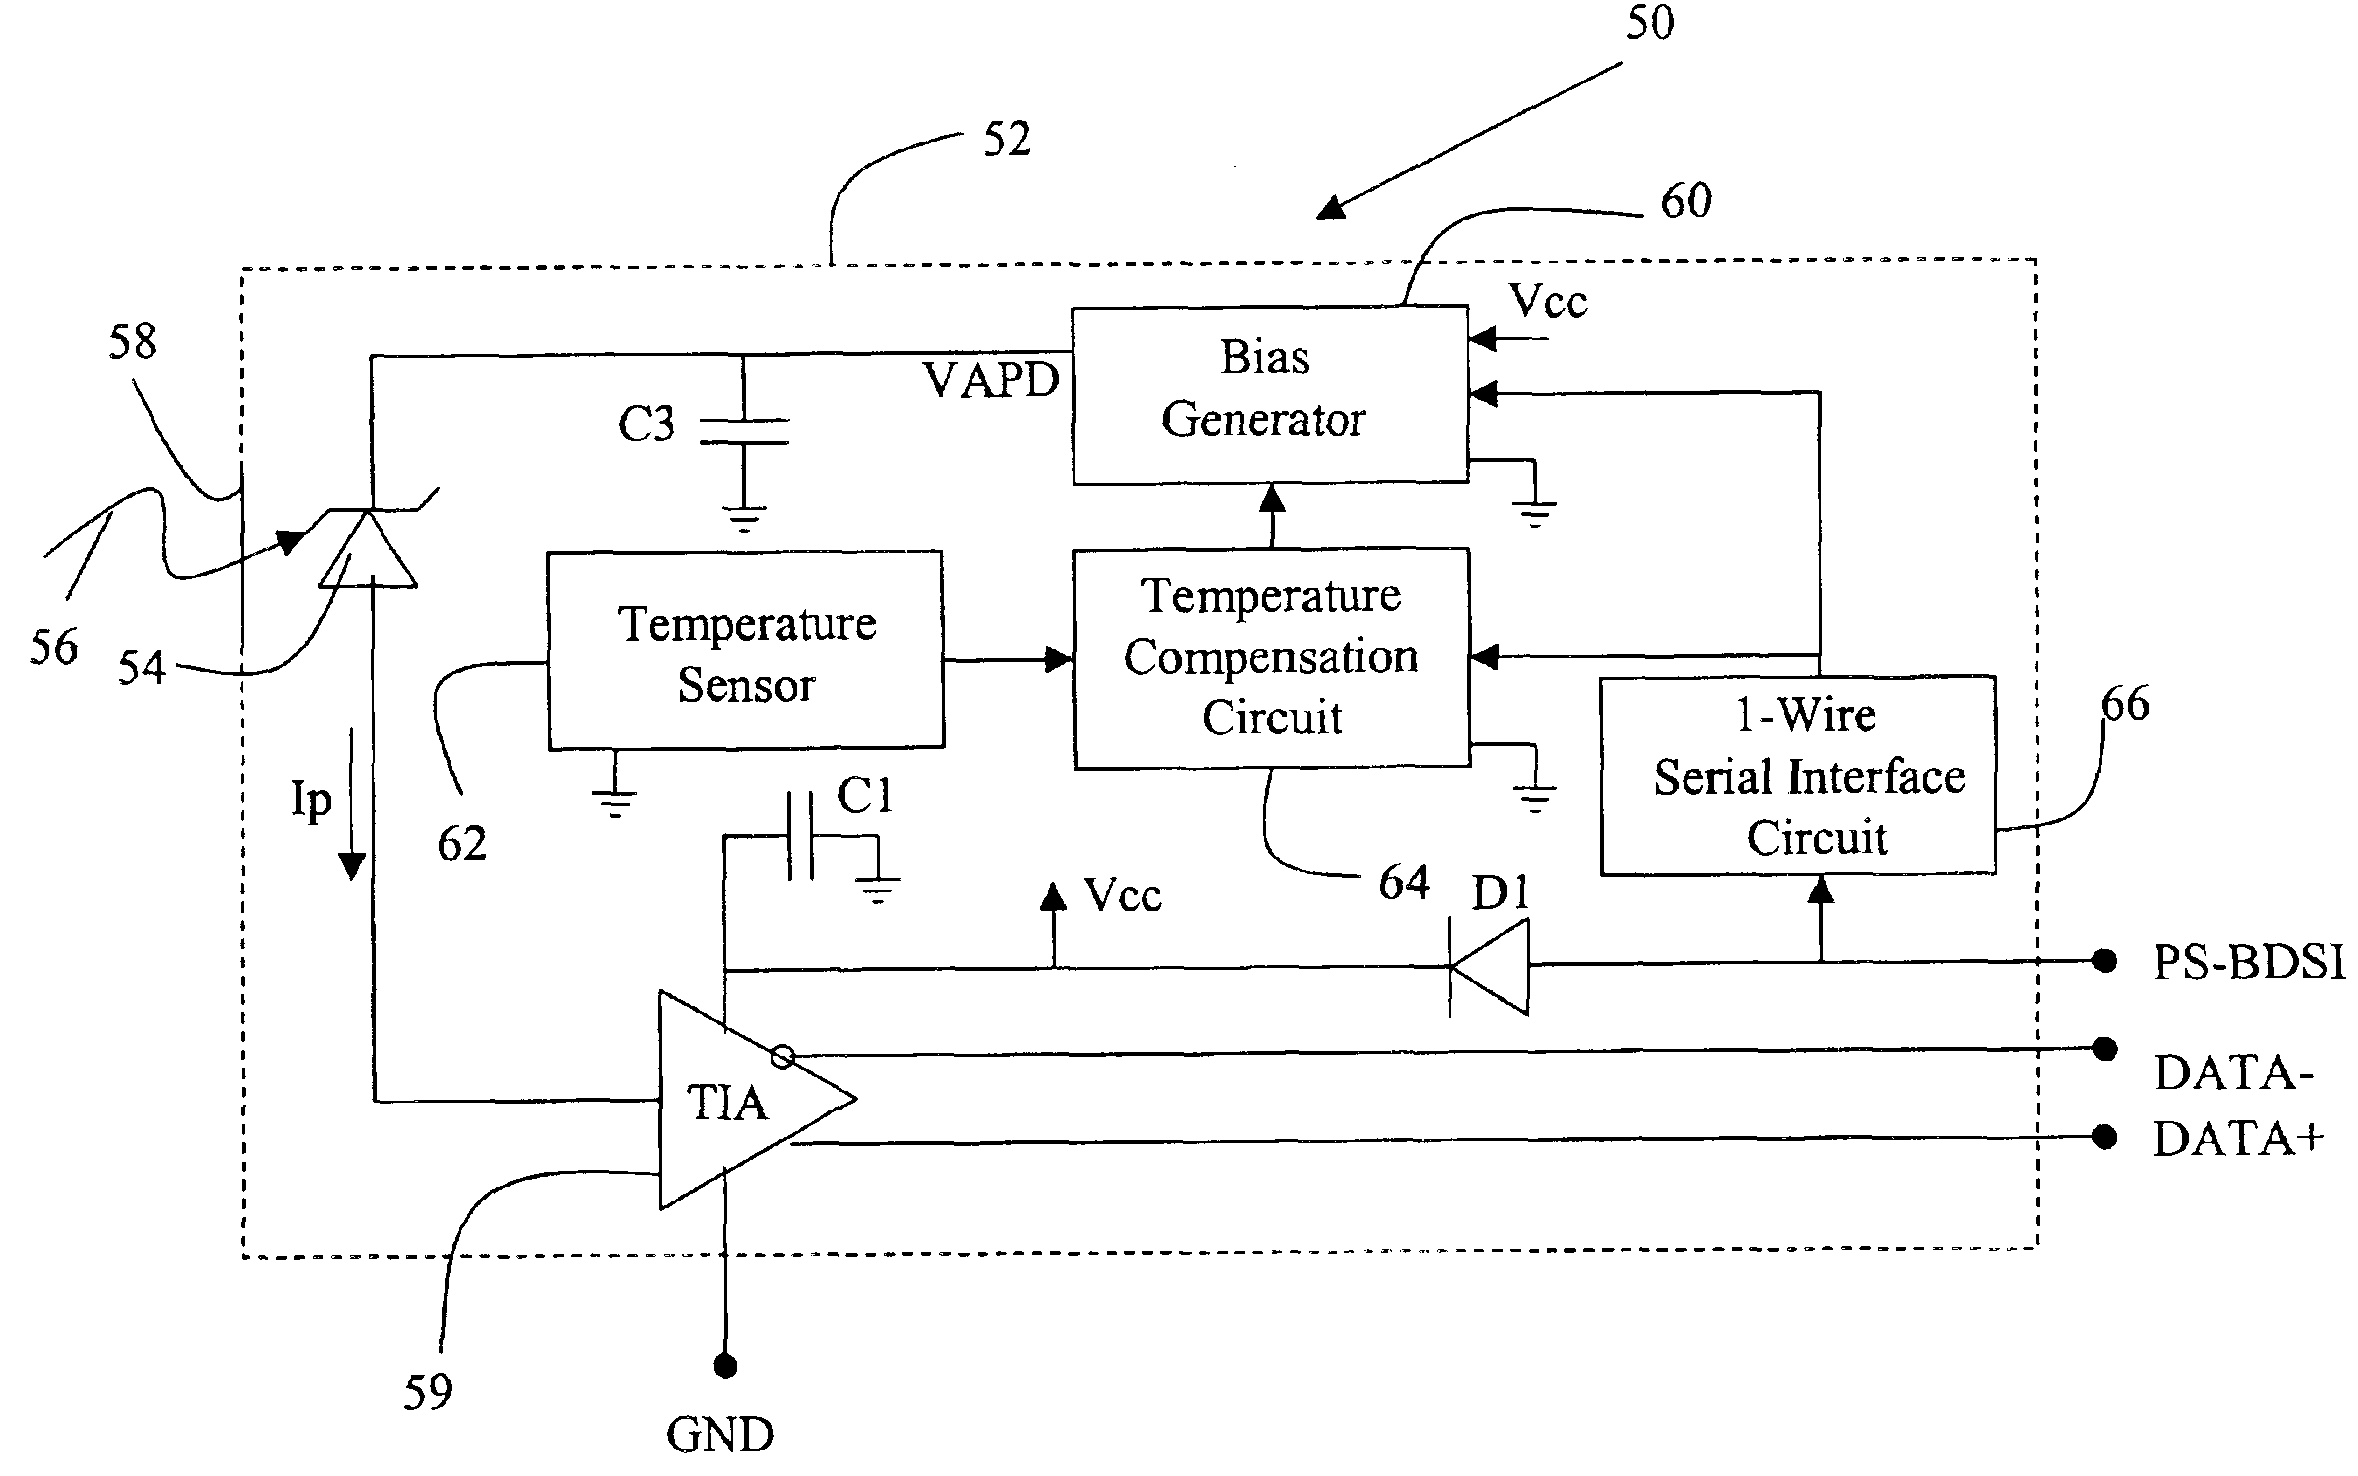 Single chip ASIC and compact packaging solution for an avalanche photodiode (APD) and bias circuit